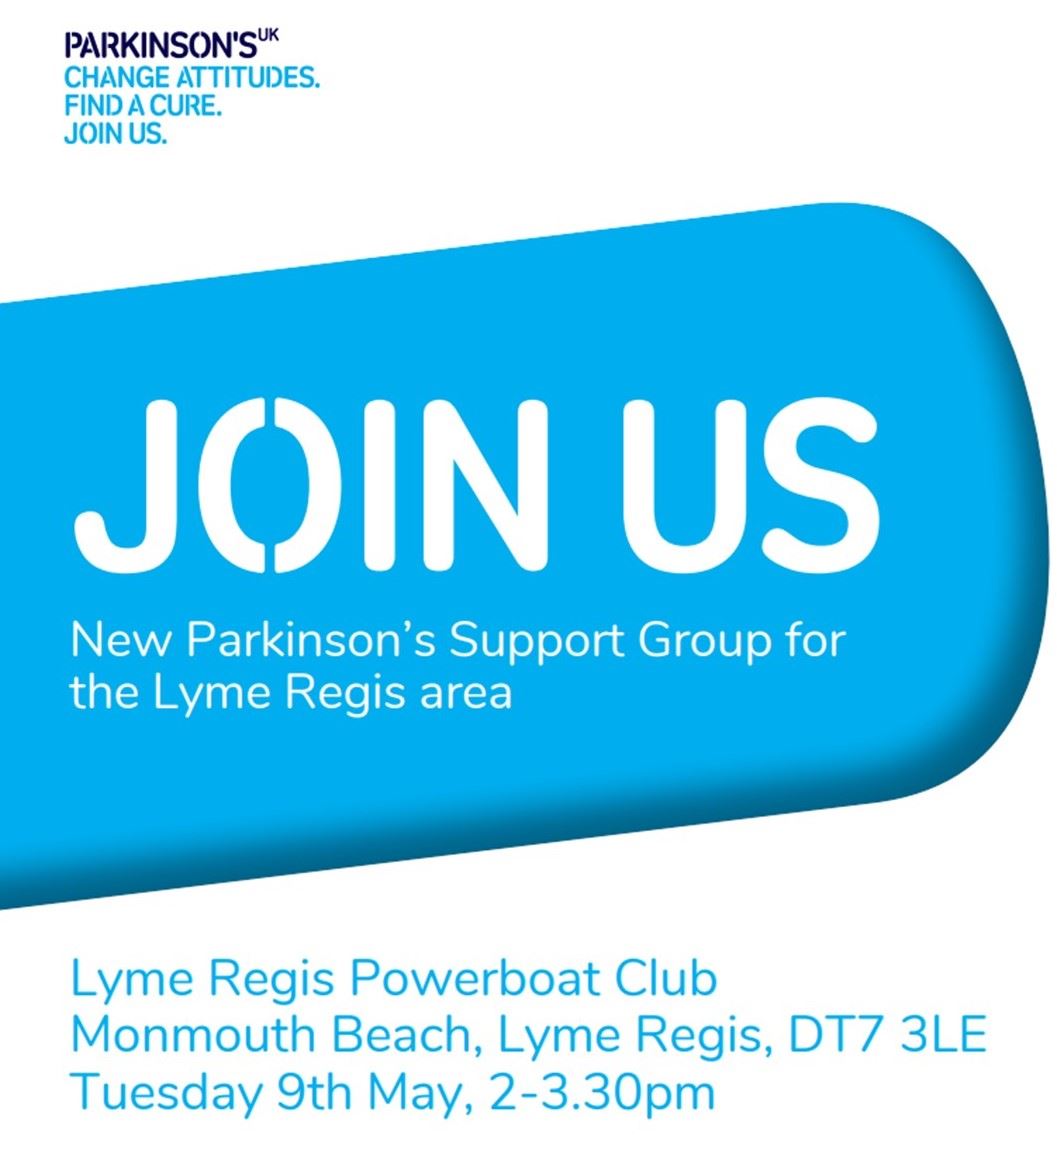 Parkinson's UK change attitudes. find a cure.  Join us.  New Parkinson's Support Group for the Lyme Regis area.  Lyme Regis Powerboat Club, Monmouth Beach, Lyme Regis, DT7 3LE.  Tuesday 9th May, 2 to 3.30 pm.